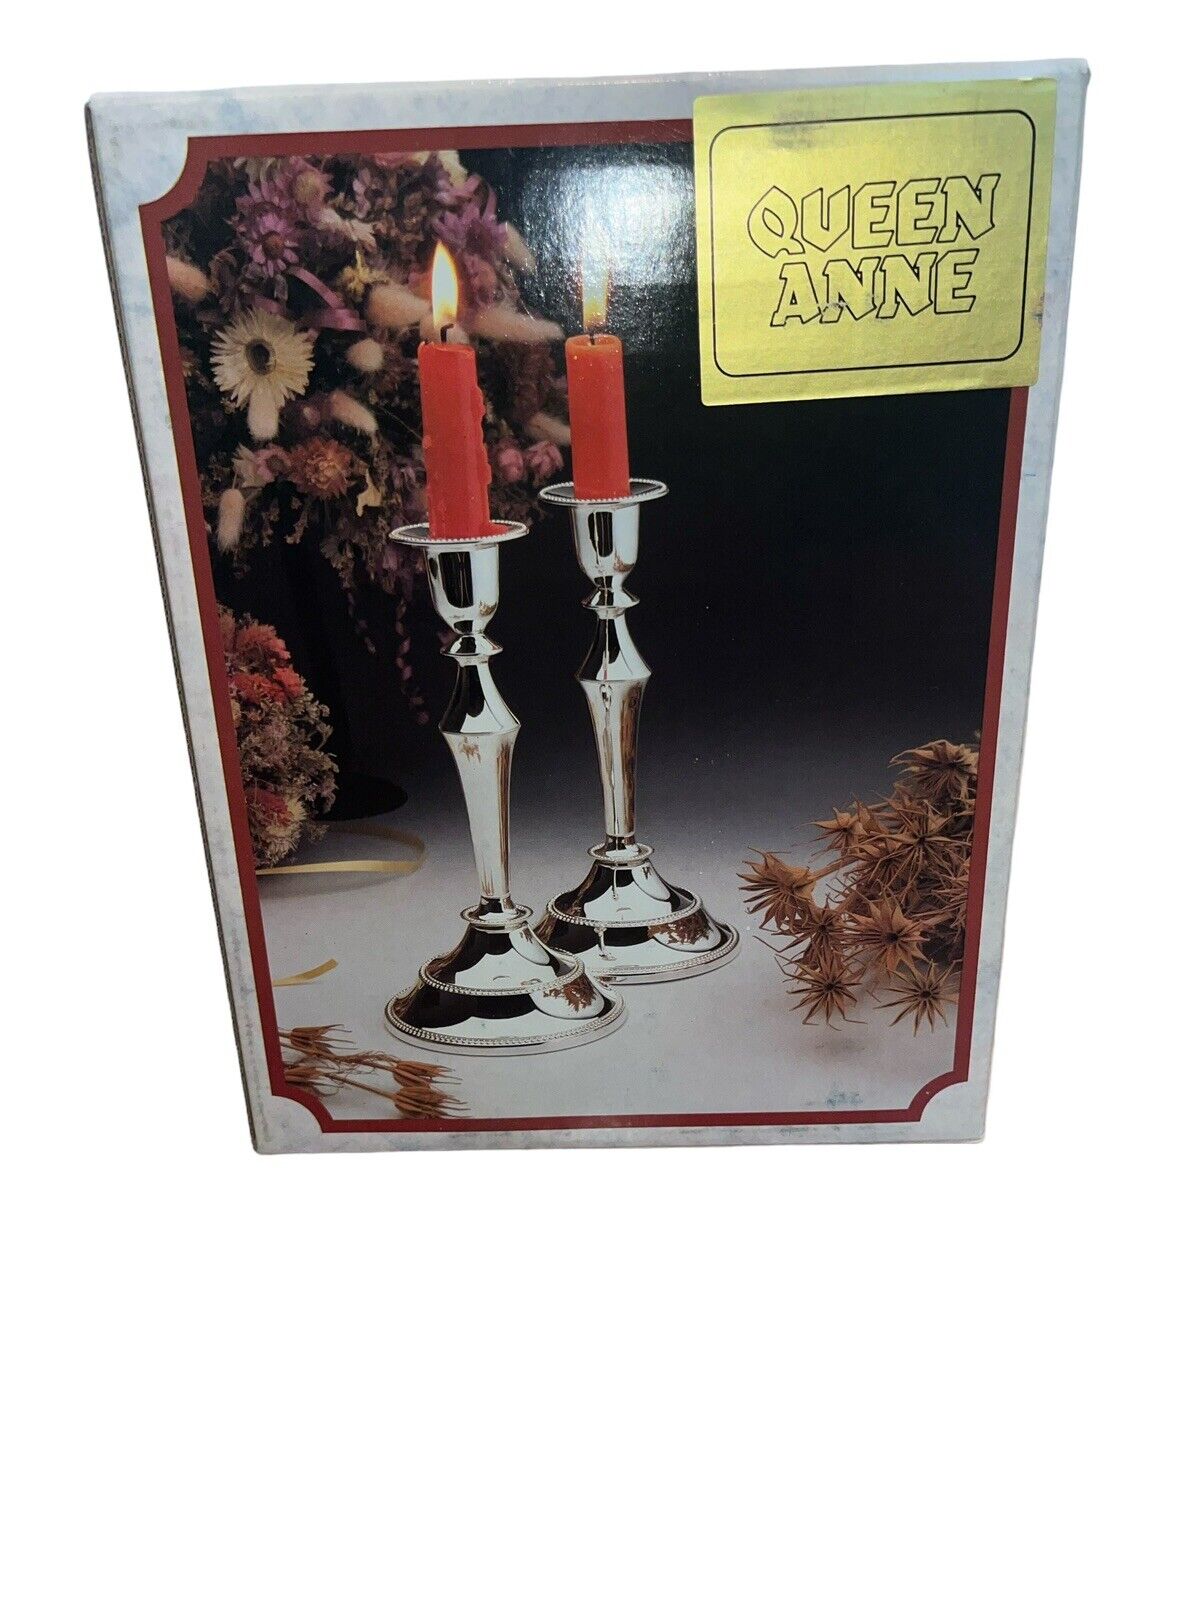 Vintage queen annie rose candlesticks Faux Bougeoirs Pair Silver Plated New